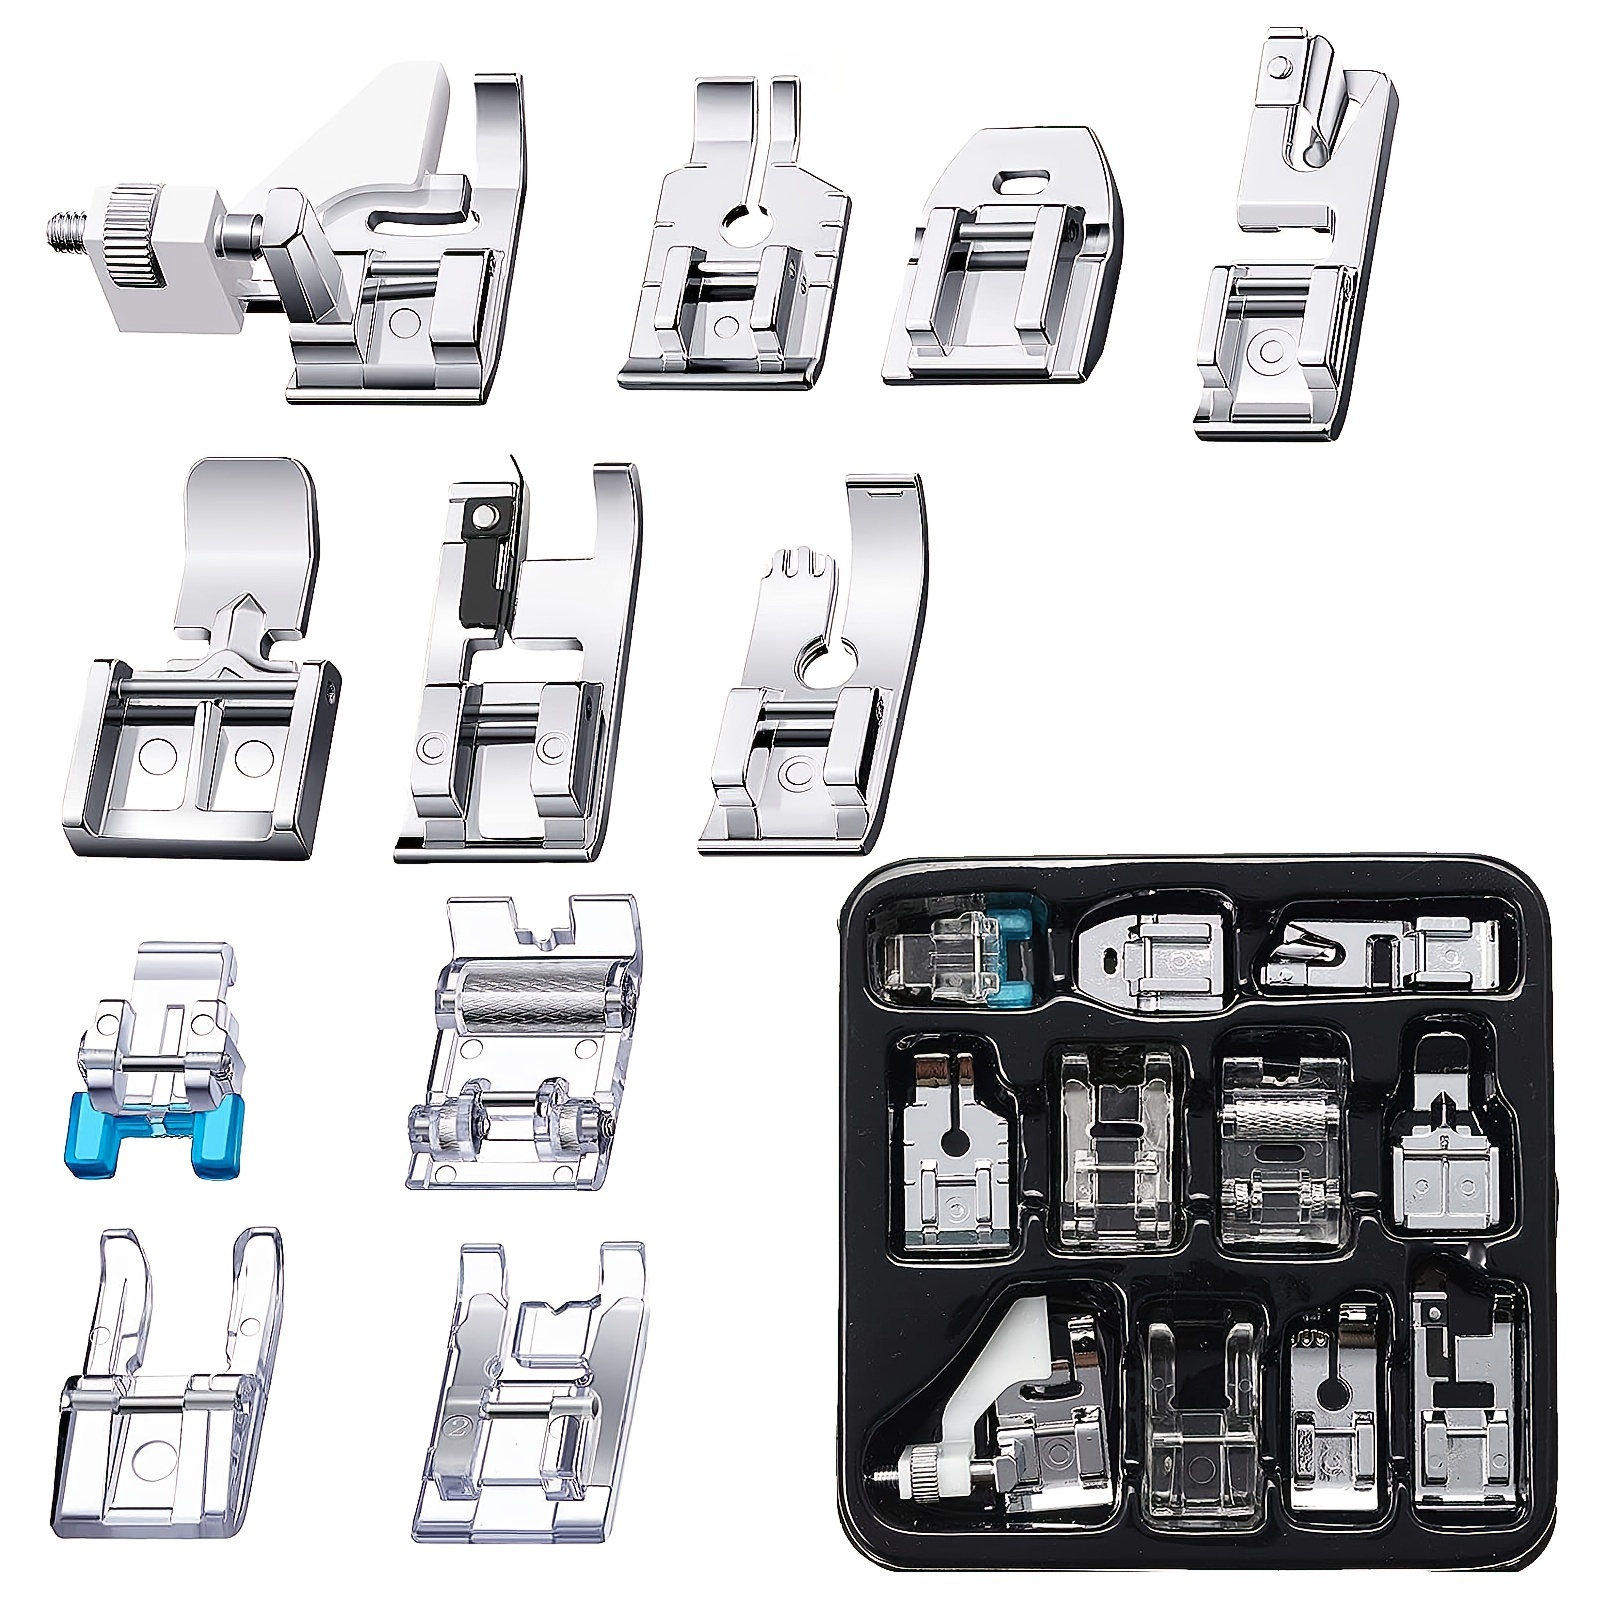 11pcs Sewing Machine Presser Feet Set with Storage Case - Brother Singer Janome Babylock Kenmore